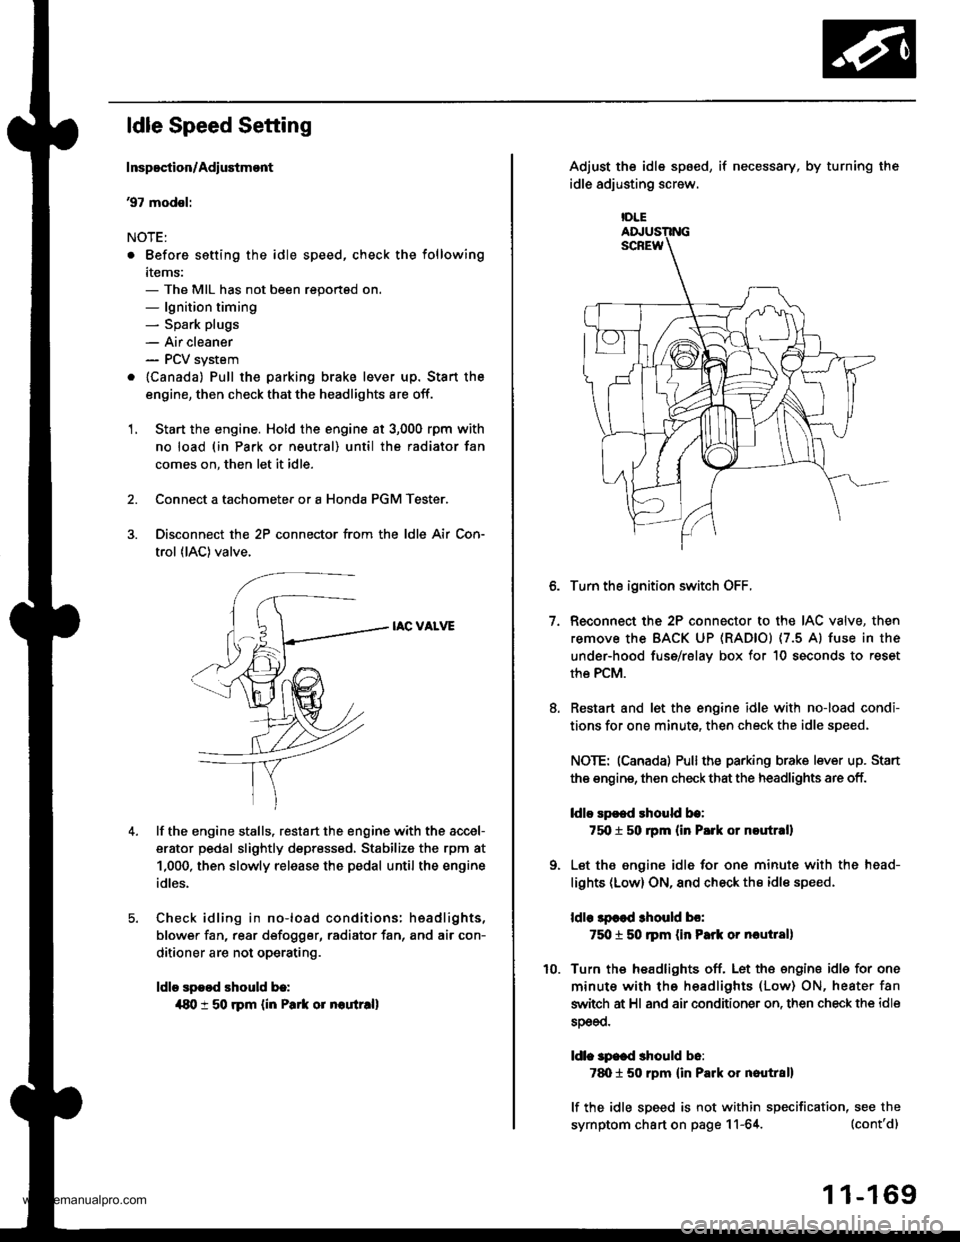 HONDA CR-V 1997 RD1-RD3 / 1.G Service Manual 
ldle Speed Setting
Inspoction/Adiustmont
37 modsl:
NOTE:
. Before setting the idle speed, check the following
items:- The MIL has not been reportsd on.- lgnition timing- Spark plugs
- Air cleaner- PC